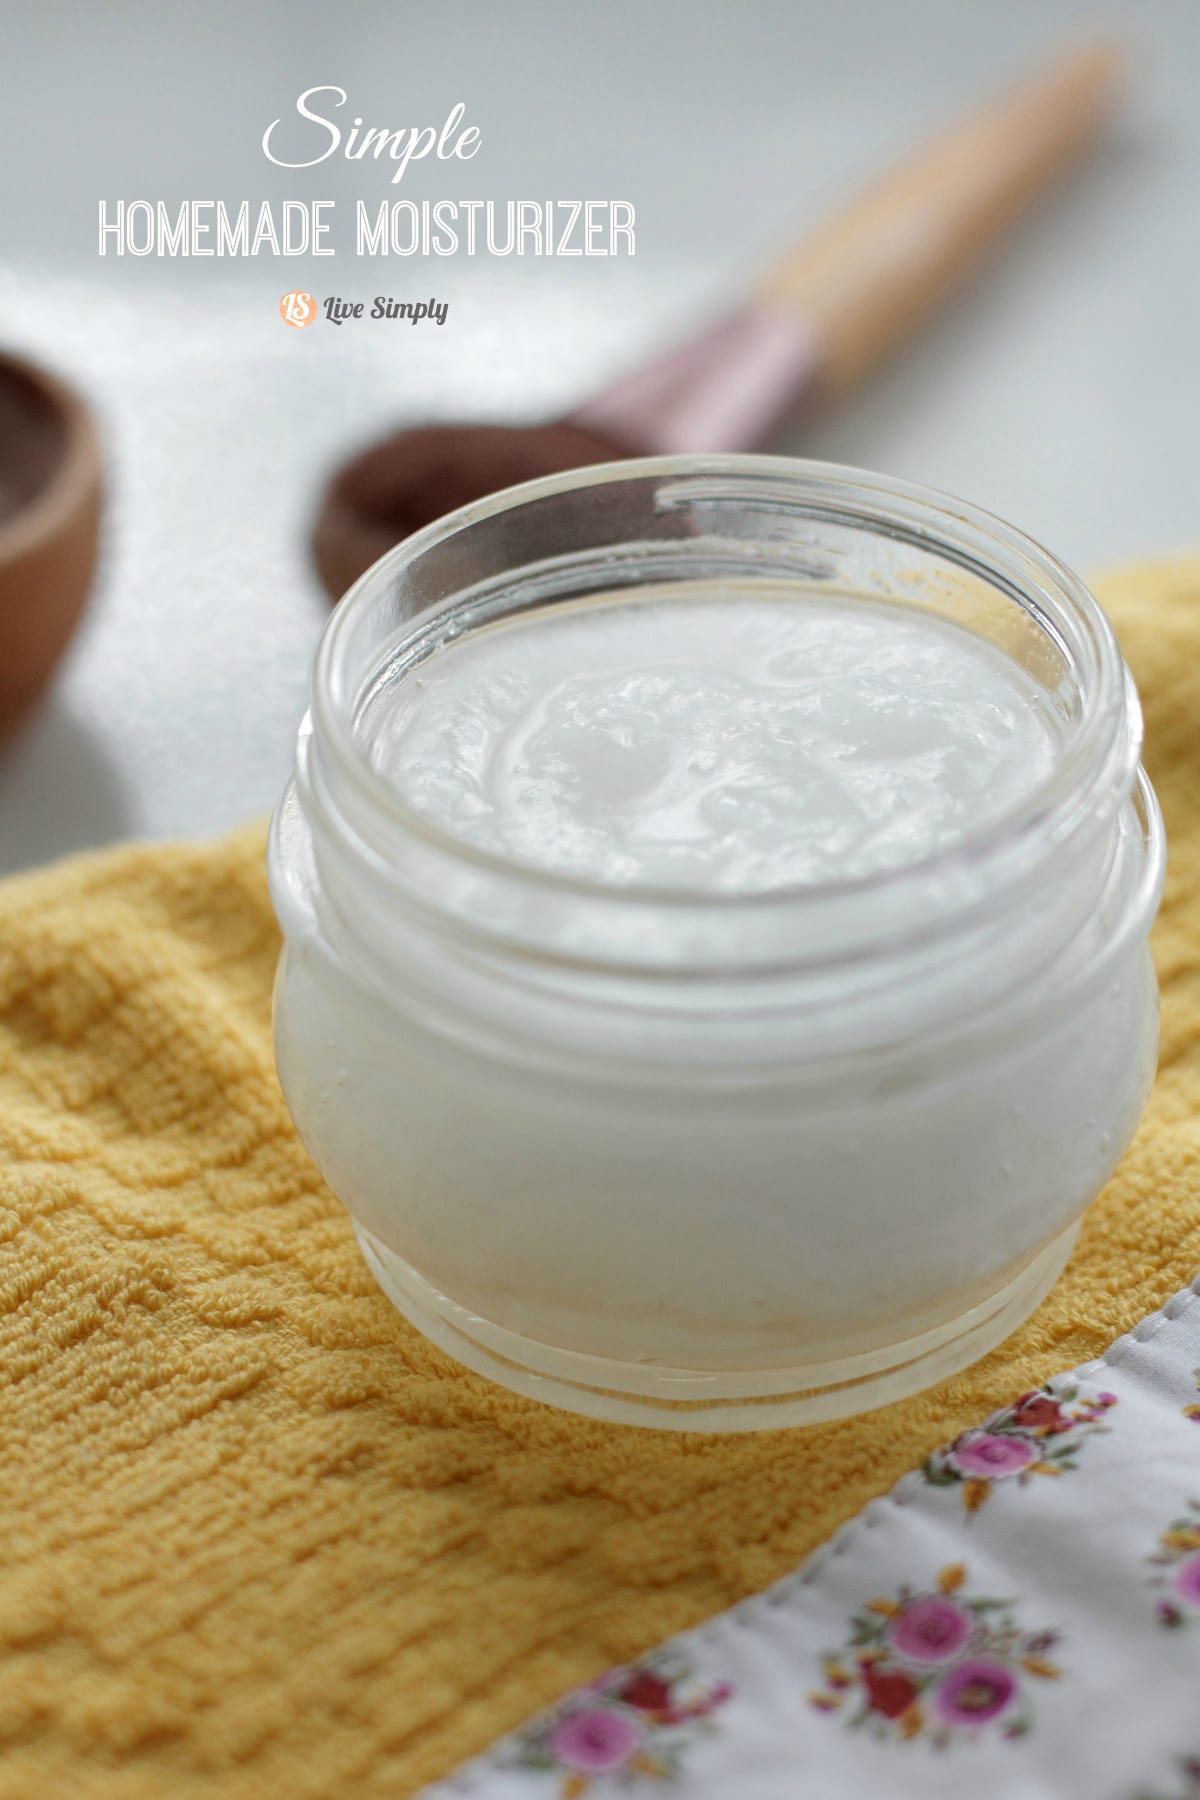 Simple homemade moisturizer. Just three basic ingredients. Nourishes the skin, naturally.